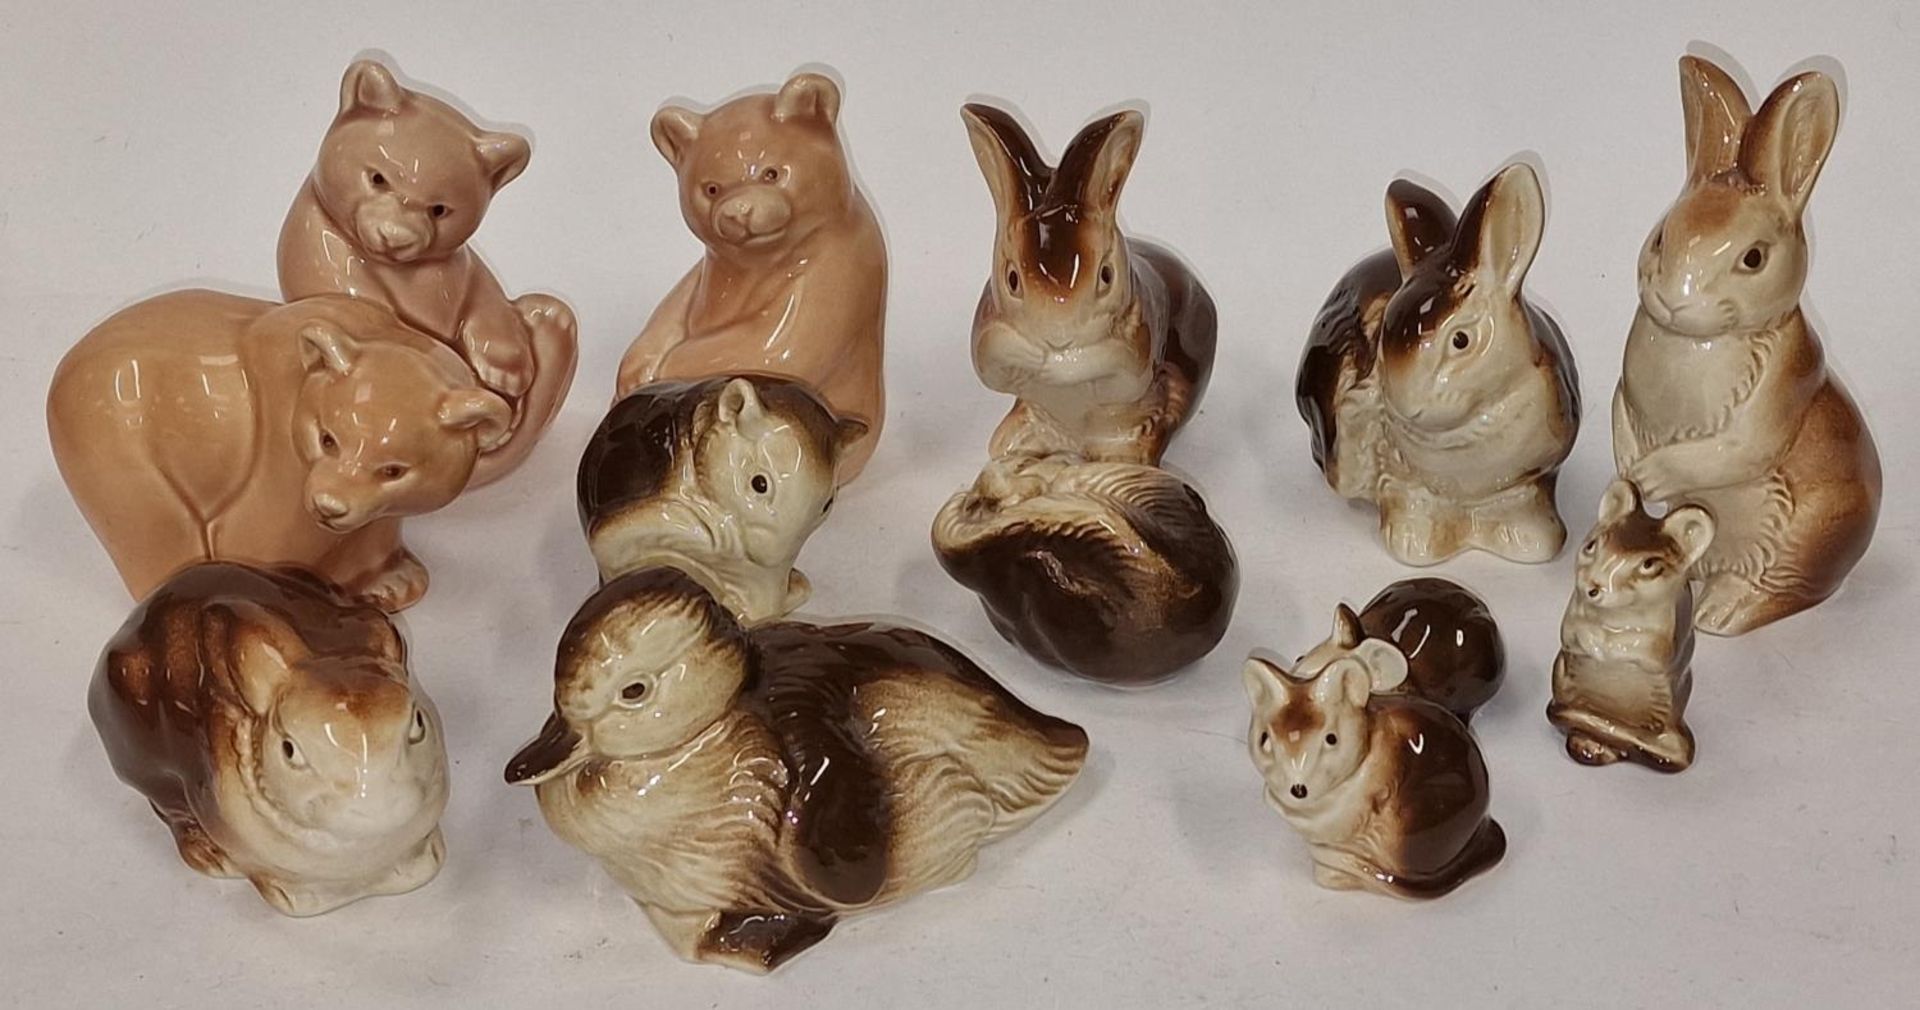 Poole Pottery collection of brown glazed animals to include bears, rabbits and dormice (13).